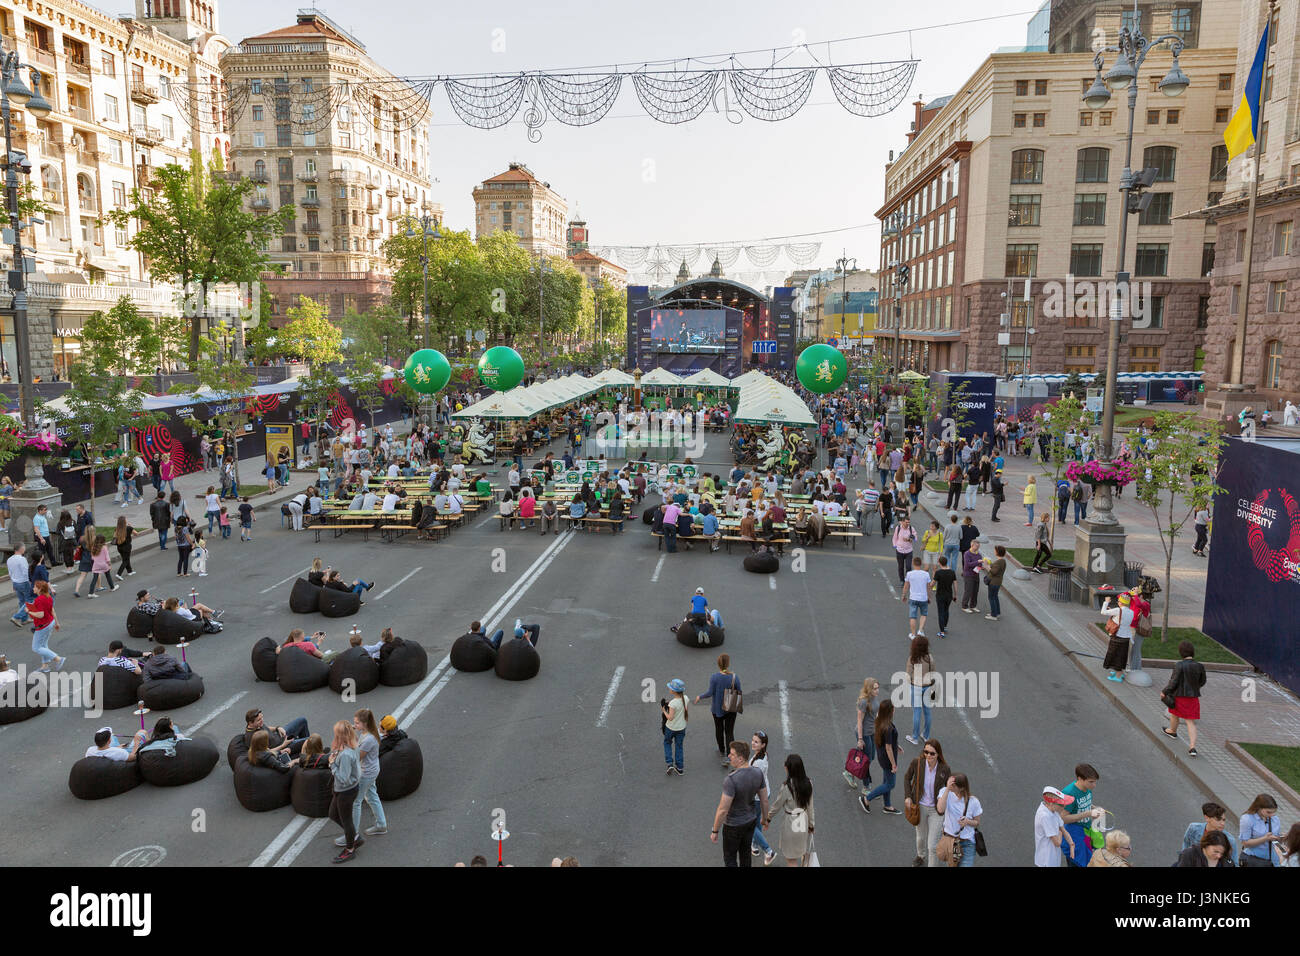 Eurovision Song Contest 2017, in Kiev, Ukraine, on 6 May, 2017. People visit fan zone during Eurovision Song Contest 2017 in Eurovision Village on Khreshchatyk street in the center of Kyiv, capital of Ukraine. Credit: Panama/Alamy Live News Stock Photo